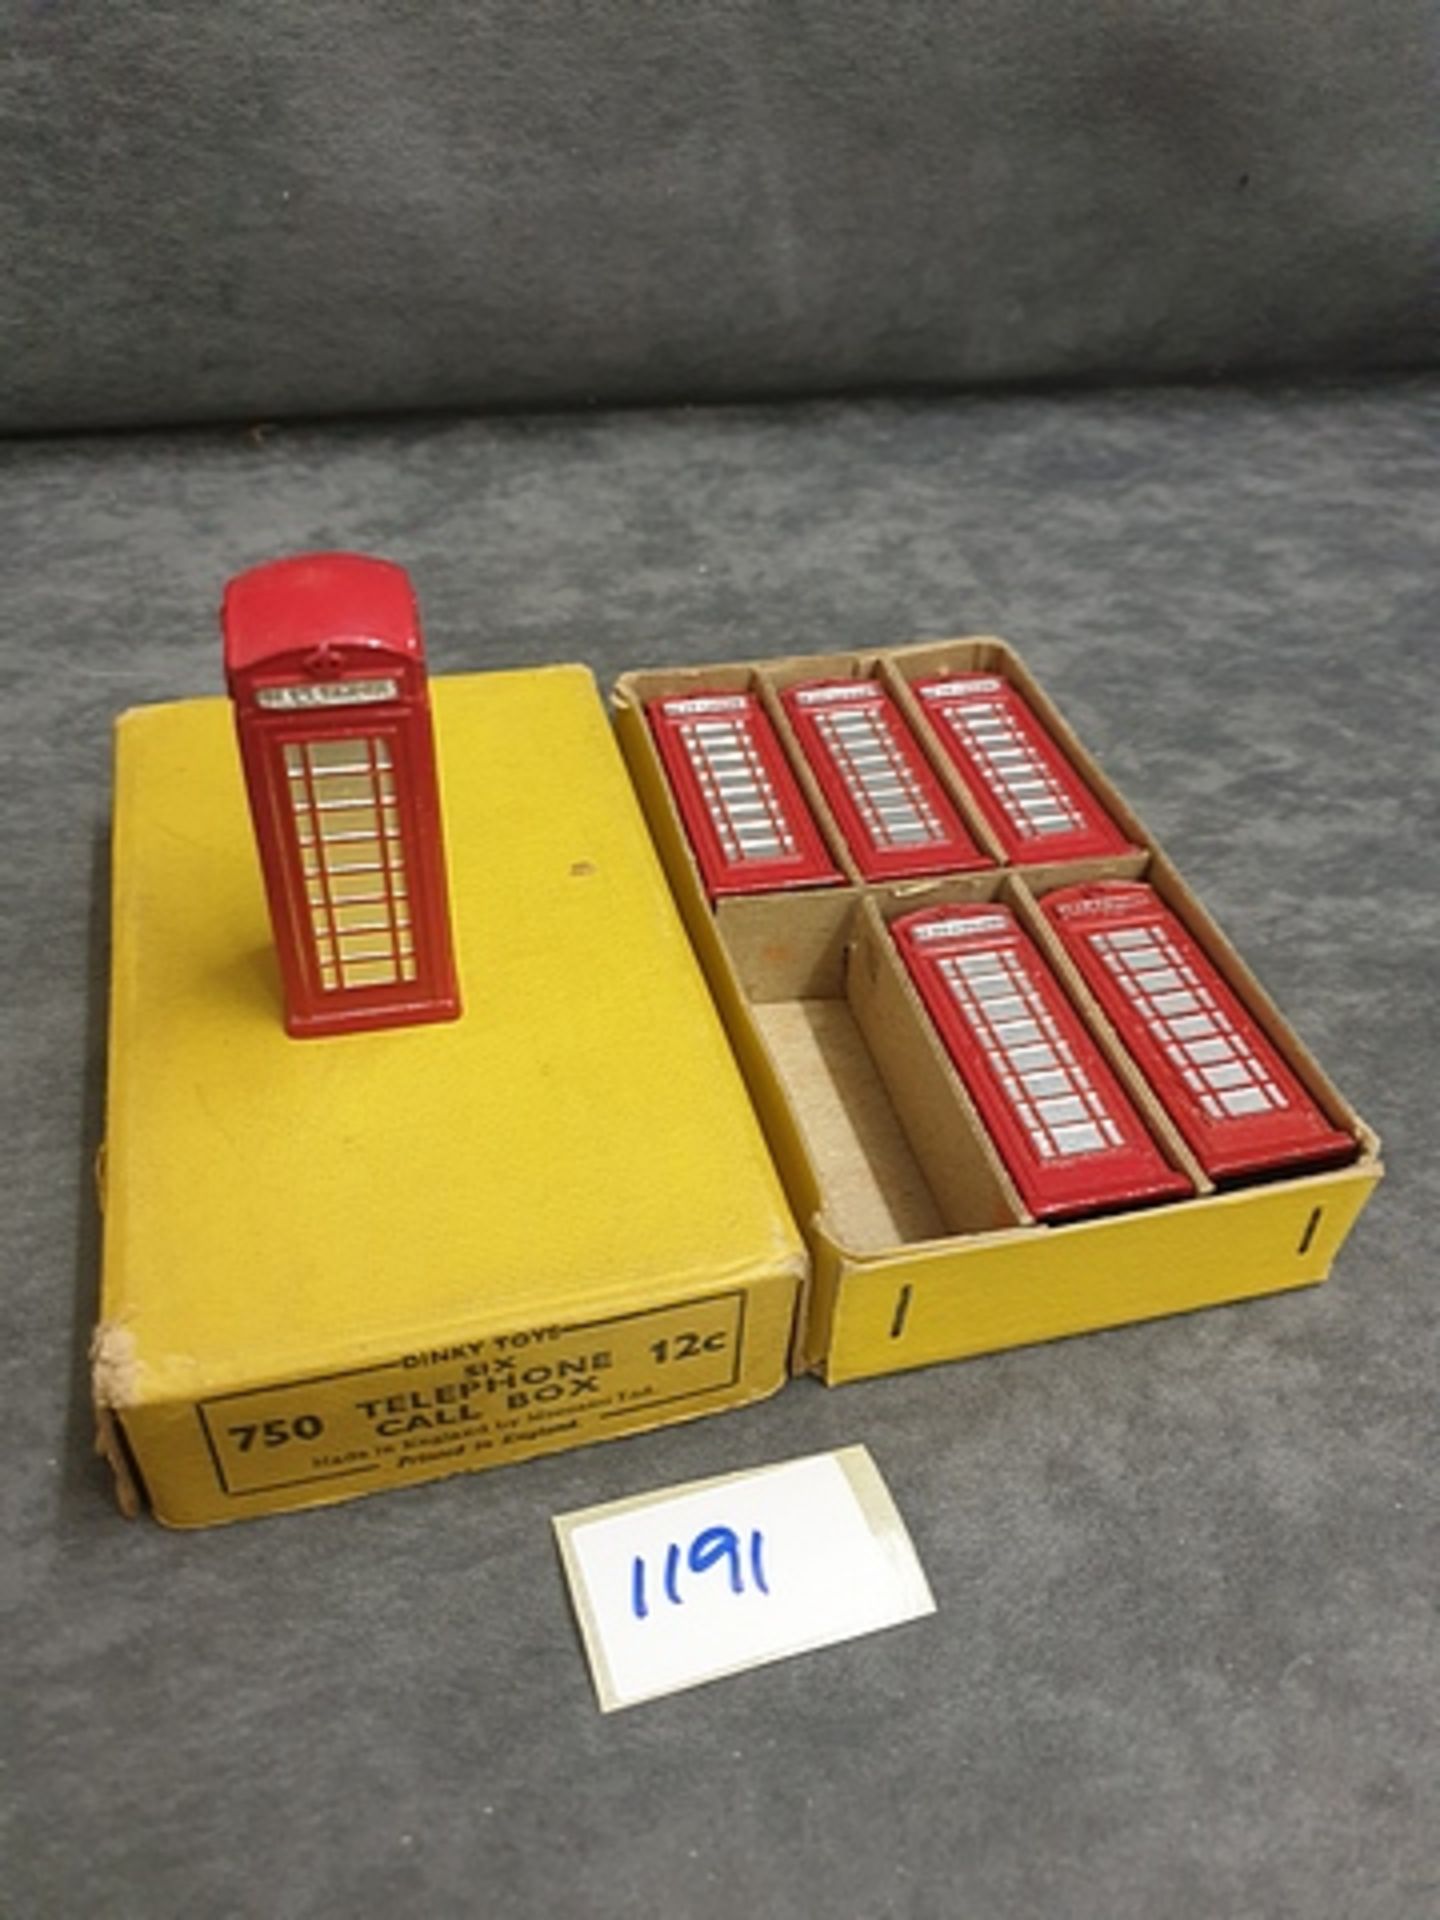 Shop Stock A Set Of 6 Dinky #750 Telephone Call Box In Box - Image 3 of 3